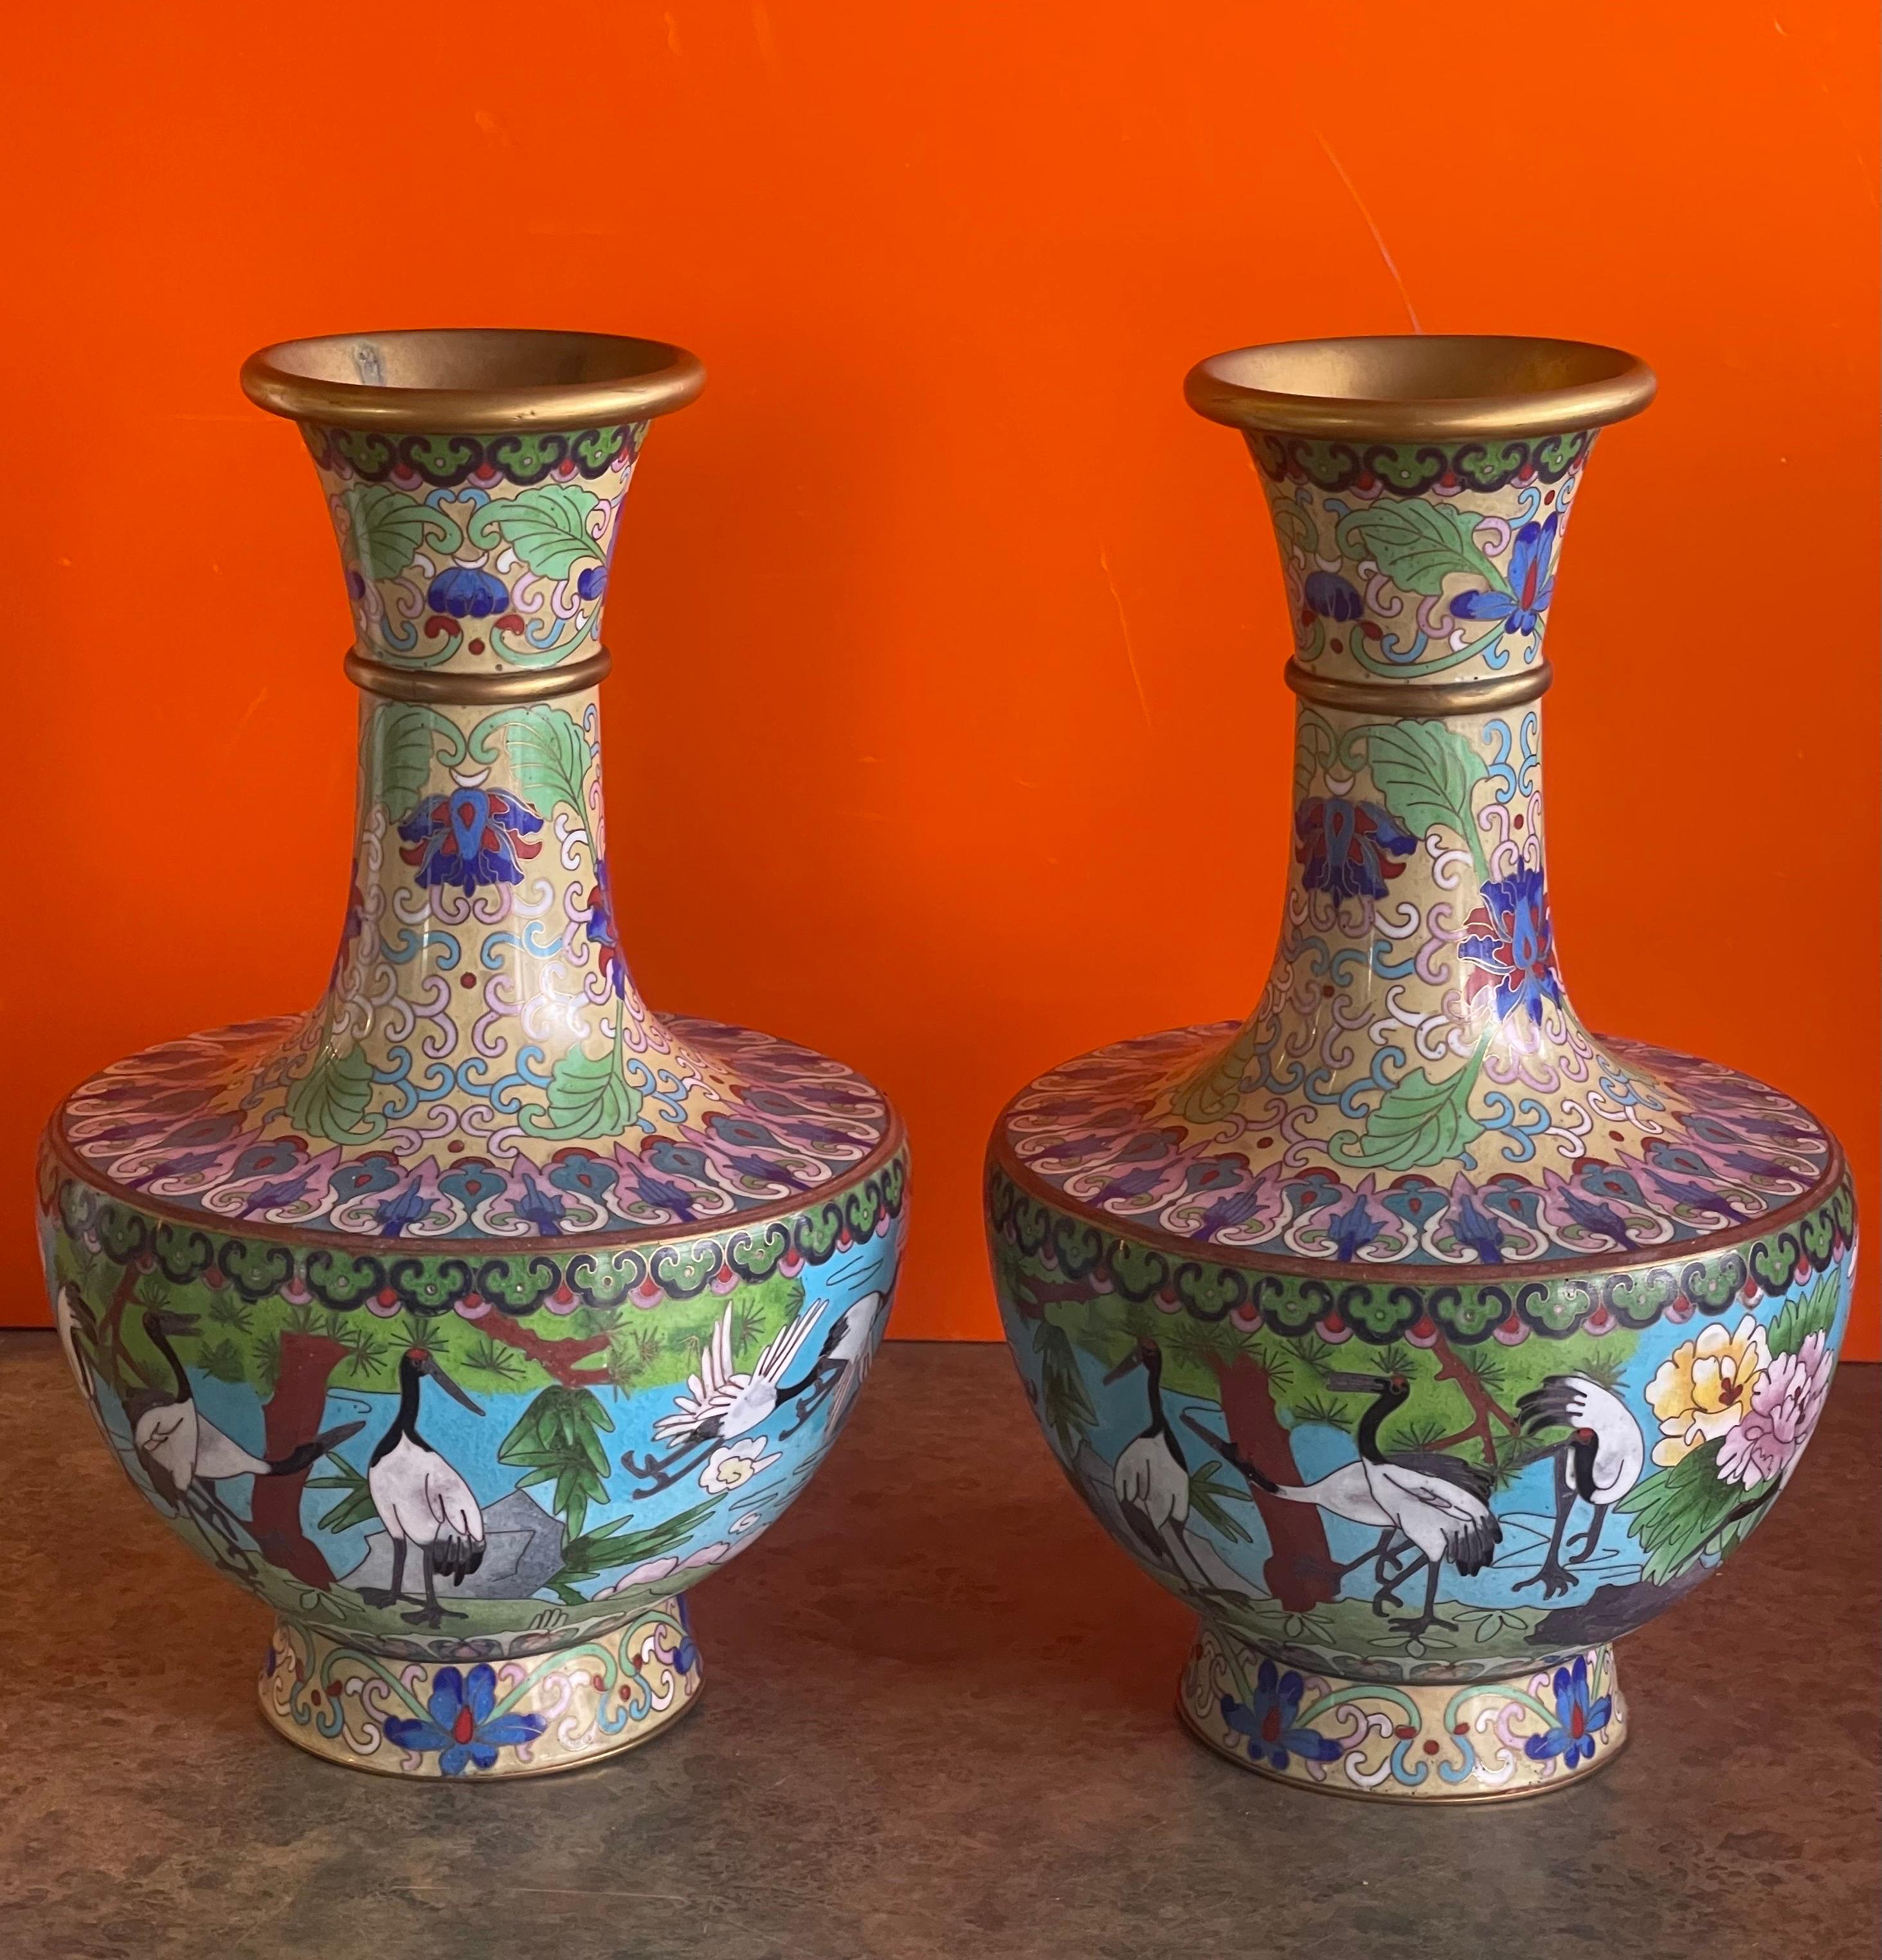 Cloissoné Mirrored Pair of Chinese Cloisonne Vases with Crane Motif